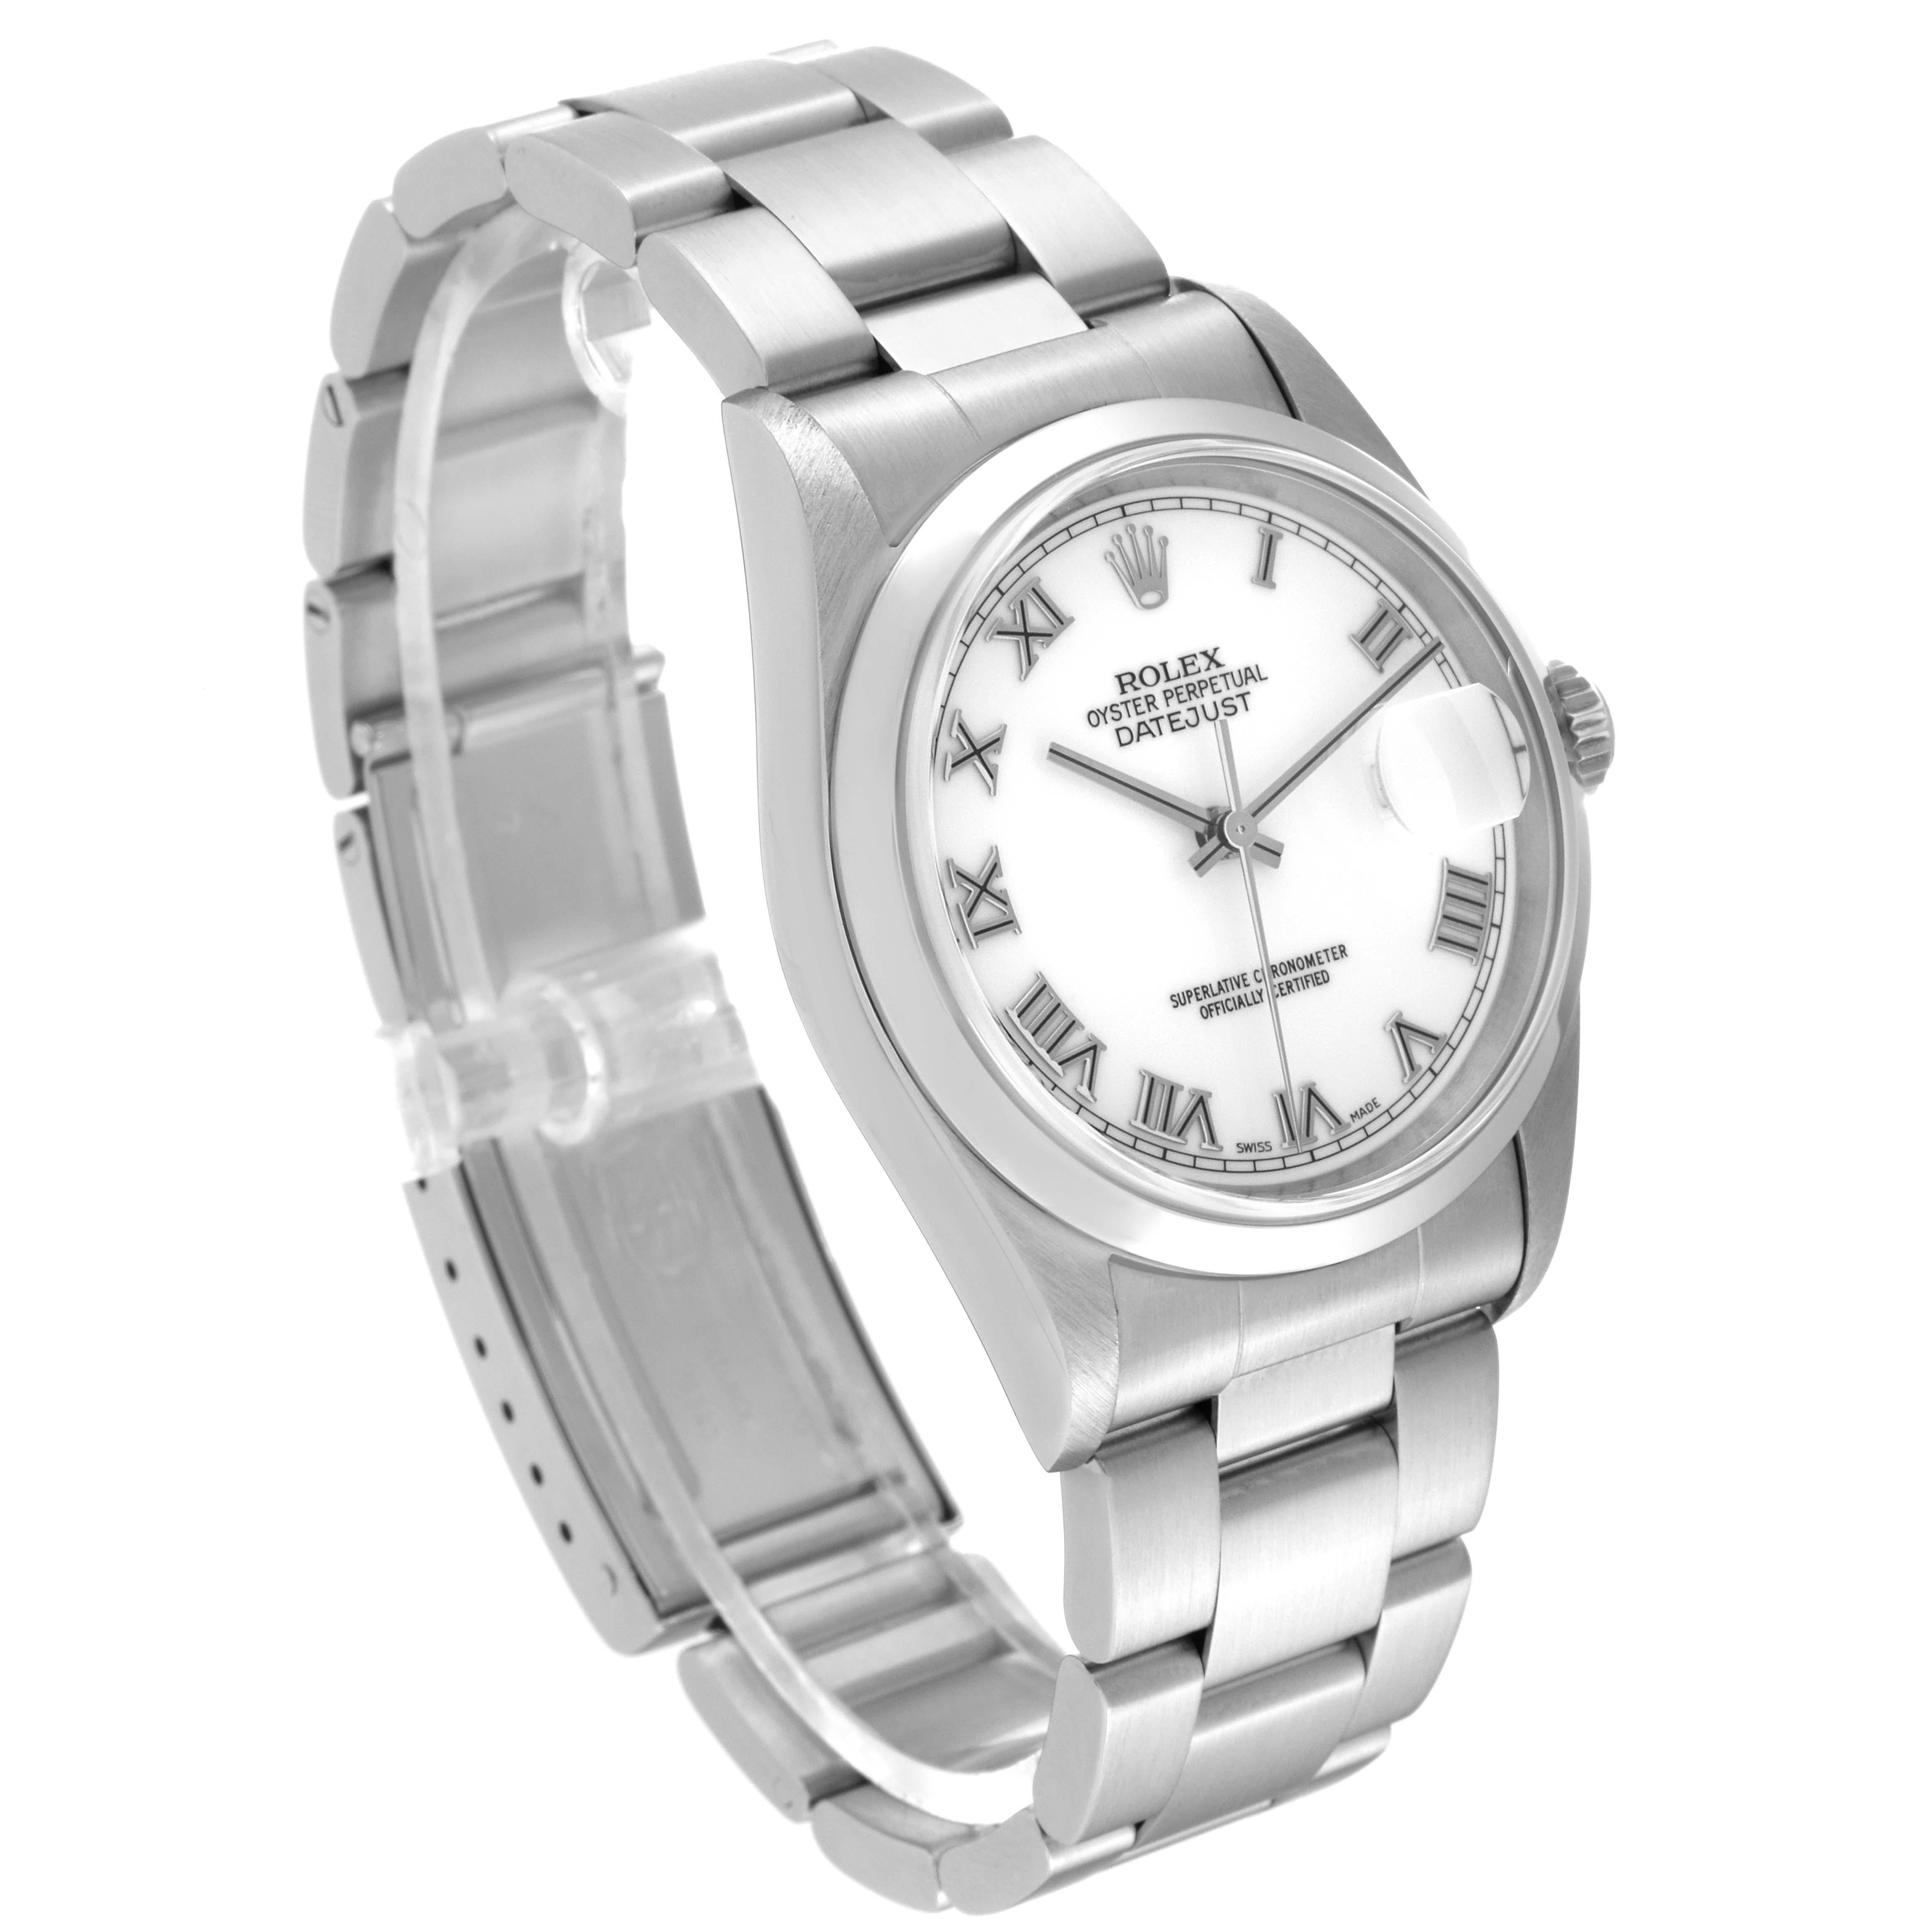 Rolex Datejust White Dial Smooth Bezel Steel Mens Watch 16200 Box Papers For Sale 8